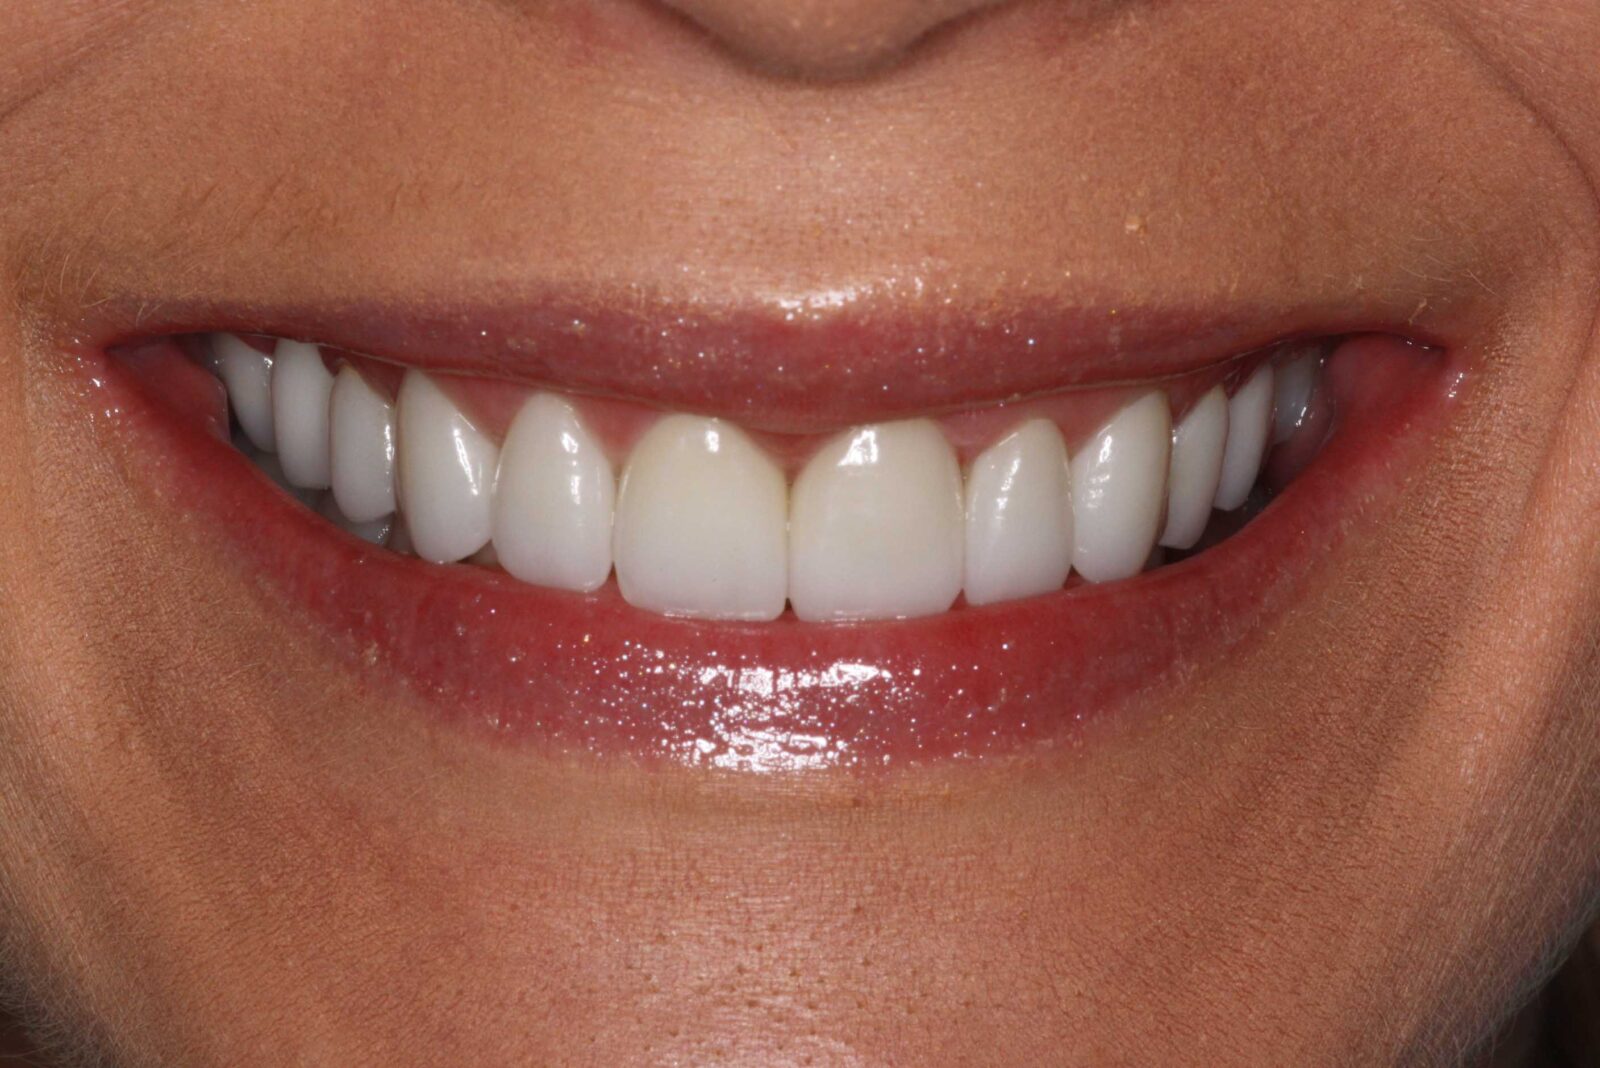 Client's teeth after treatment